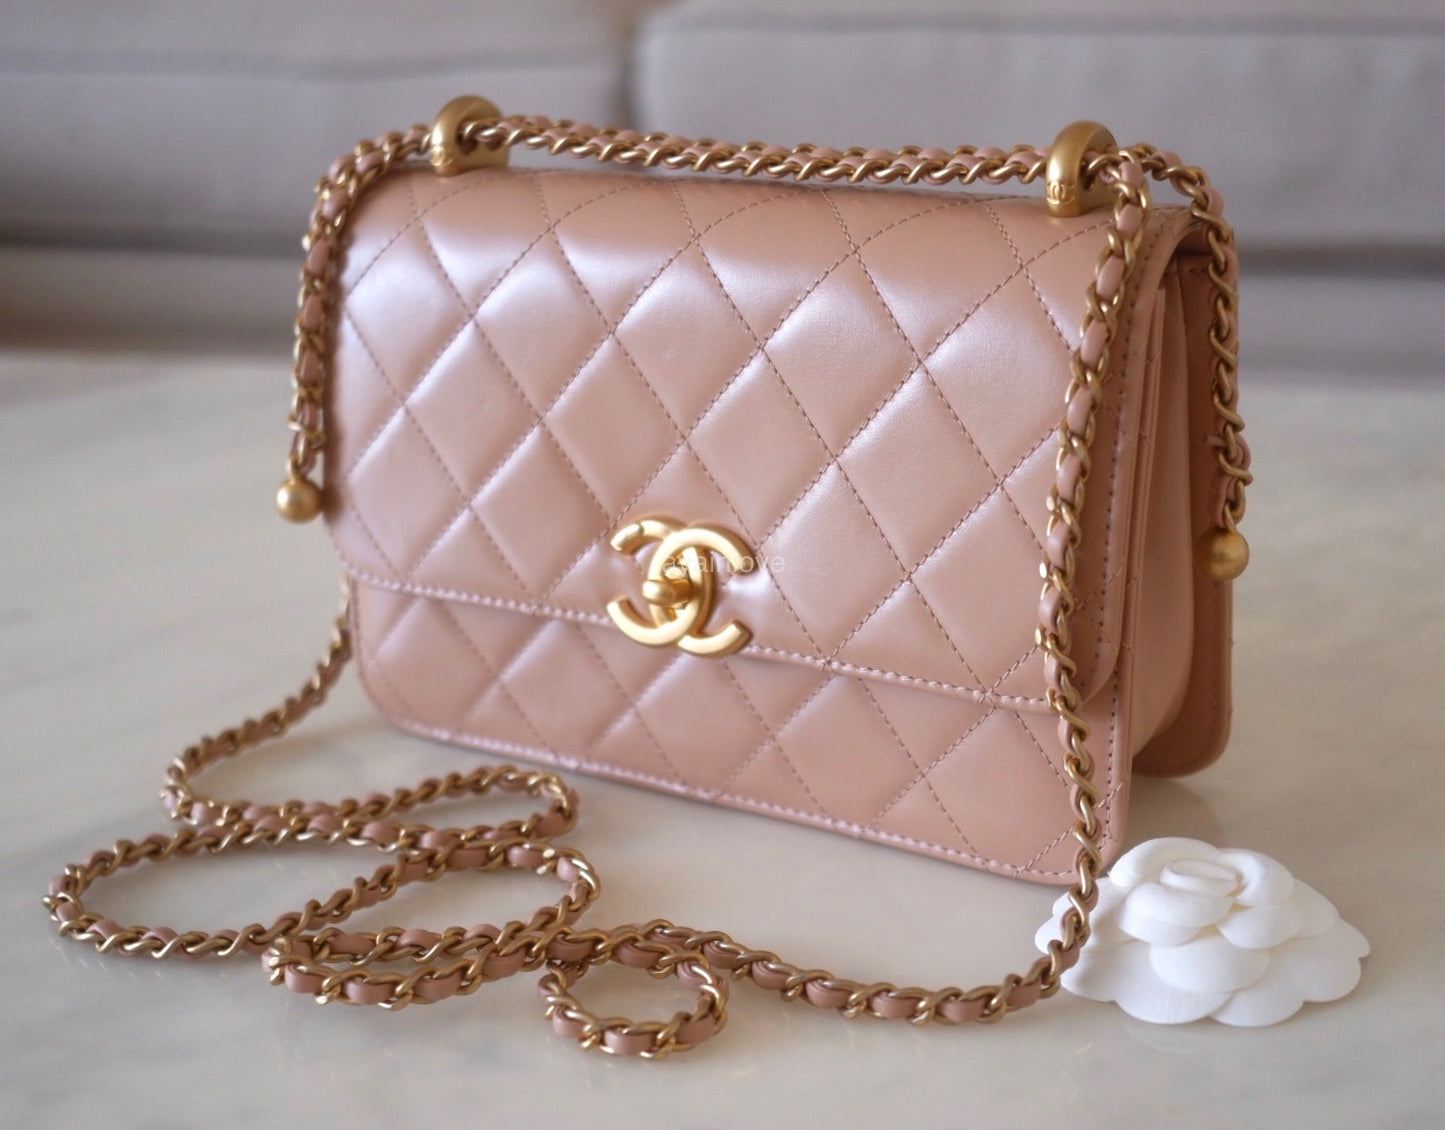 CHANEL 21A Beige Perfect Fit Calf Skin Flap Bag Adjustable Strap Gold – AYAINLOVE  CURATED LUXURIES